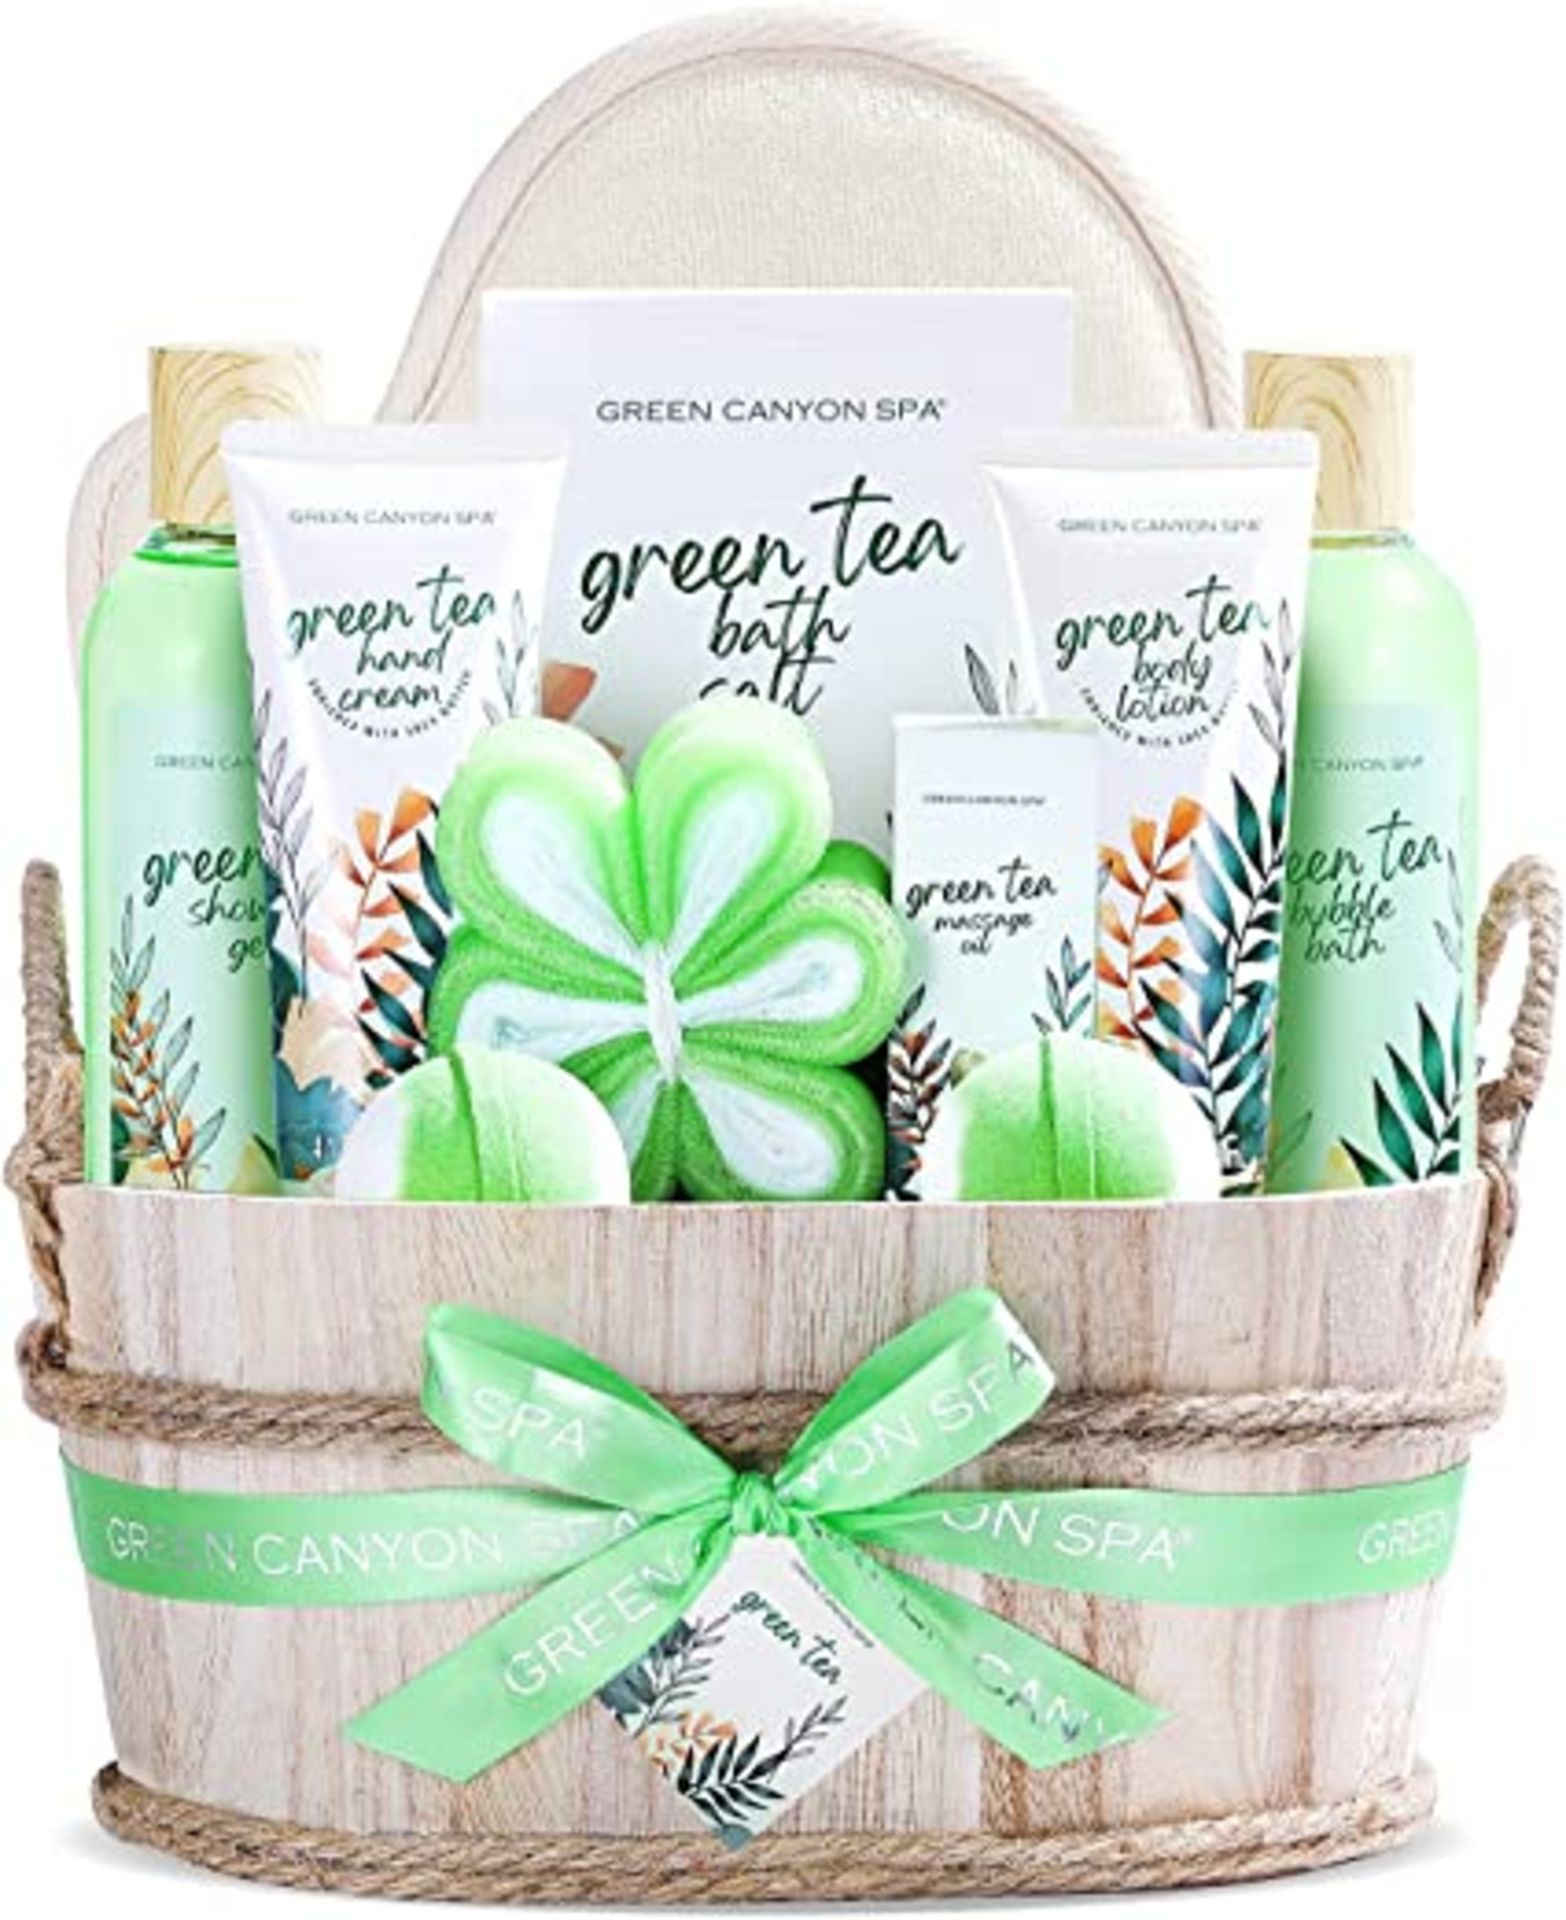 4 X BRAND NEW GREEN CANYON SPA SETS IN WOODEN BASKET INCLUDING SHOWER GEL, BUBBLE BATH, HAND